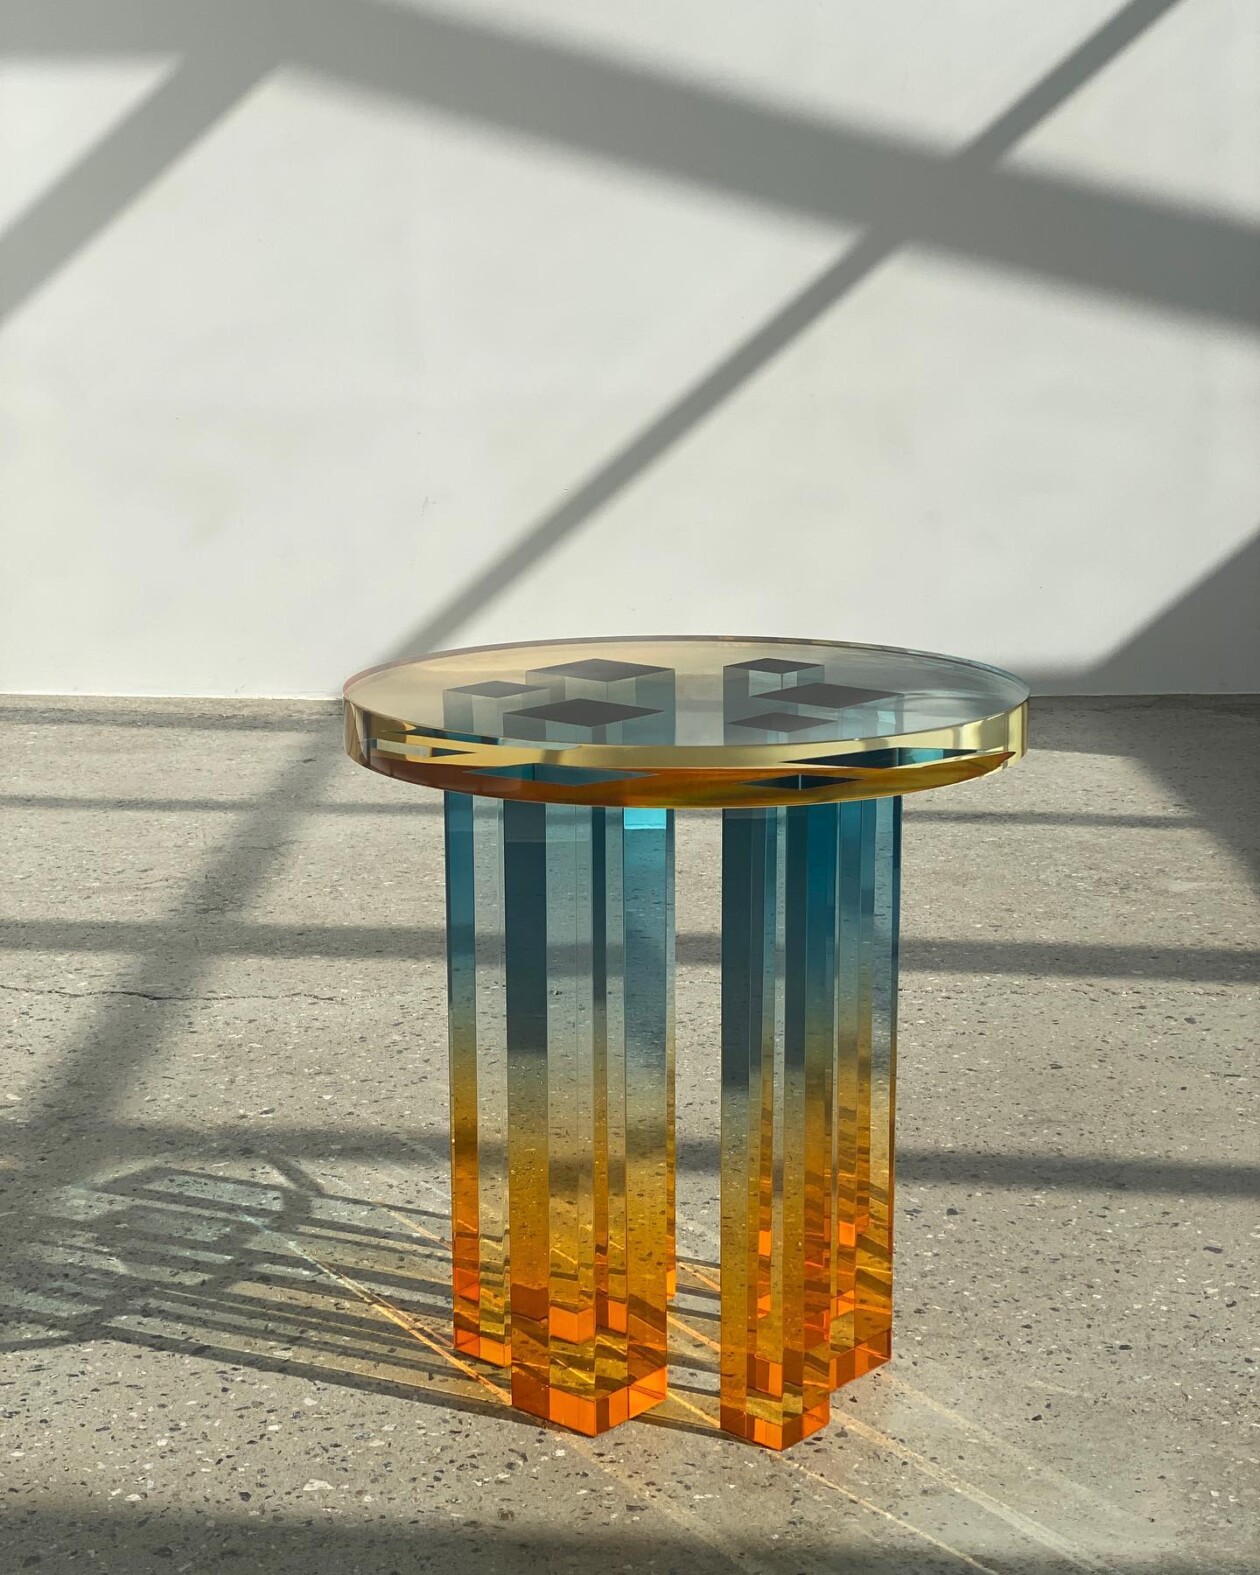 Gorgeous Sculptural Furniture Made Of Gradient Acrylic By South Korean Artist Saerom Yoon (14)